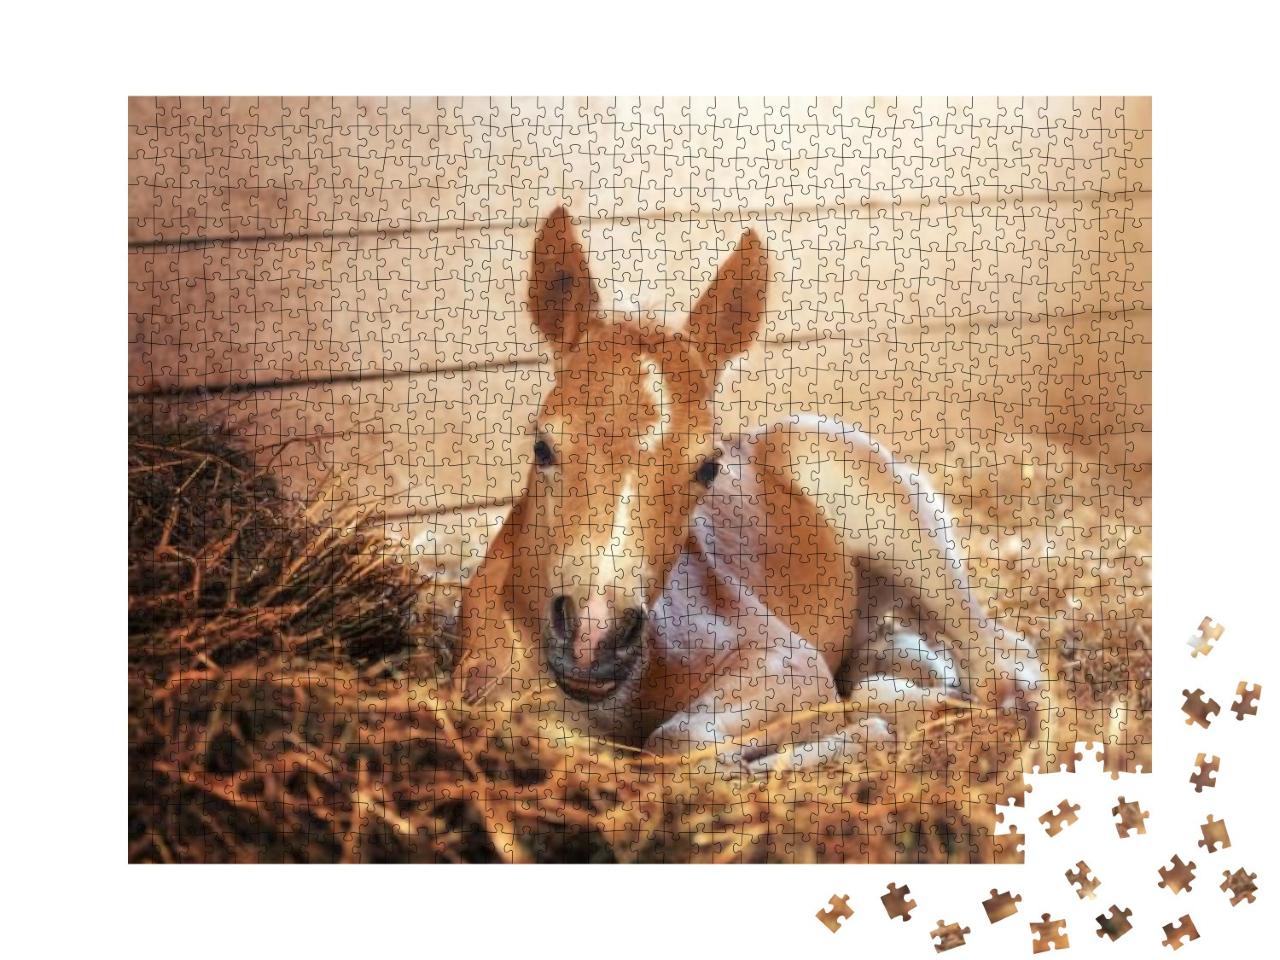 Beautiful Haflinger Foal - Horse Photo... Jigsaw Puzzle with 1000 pieces